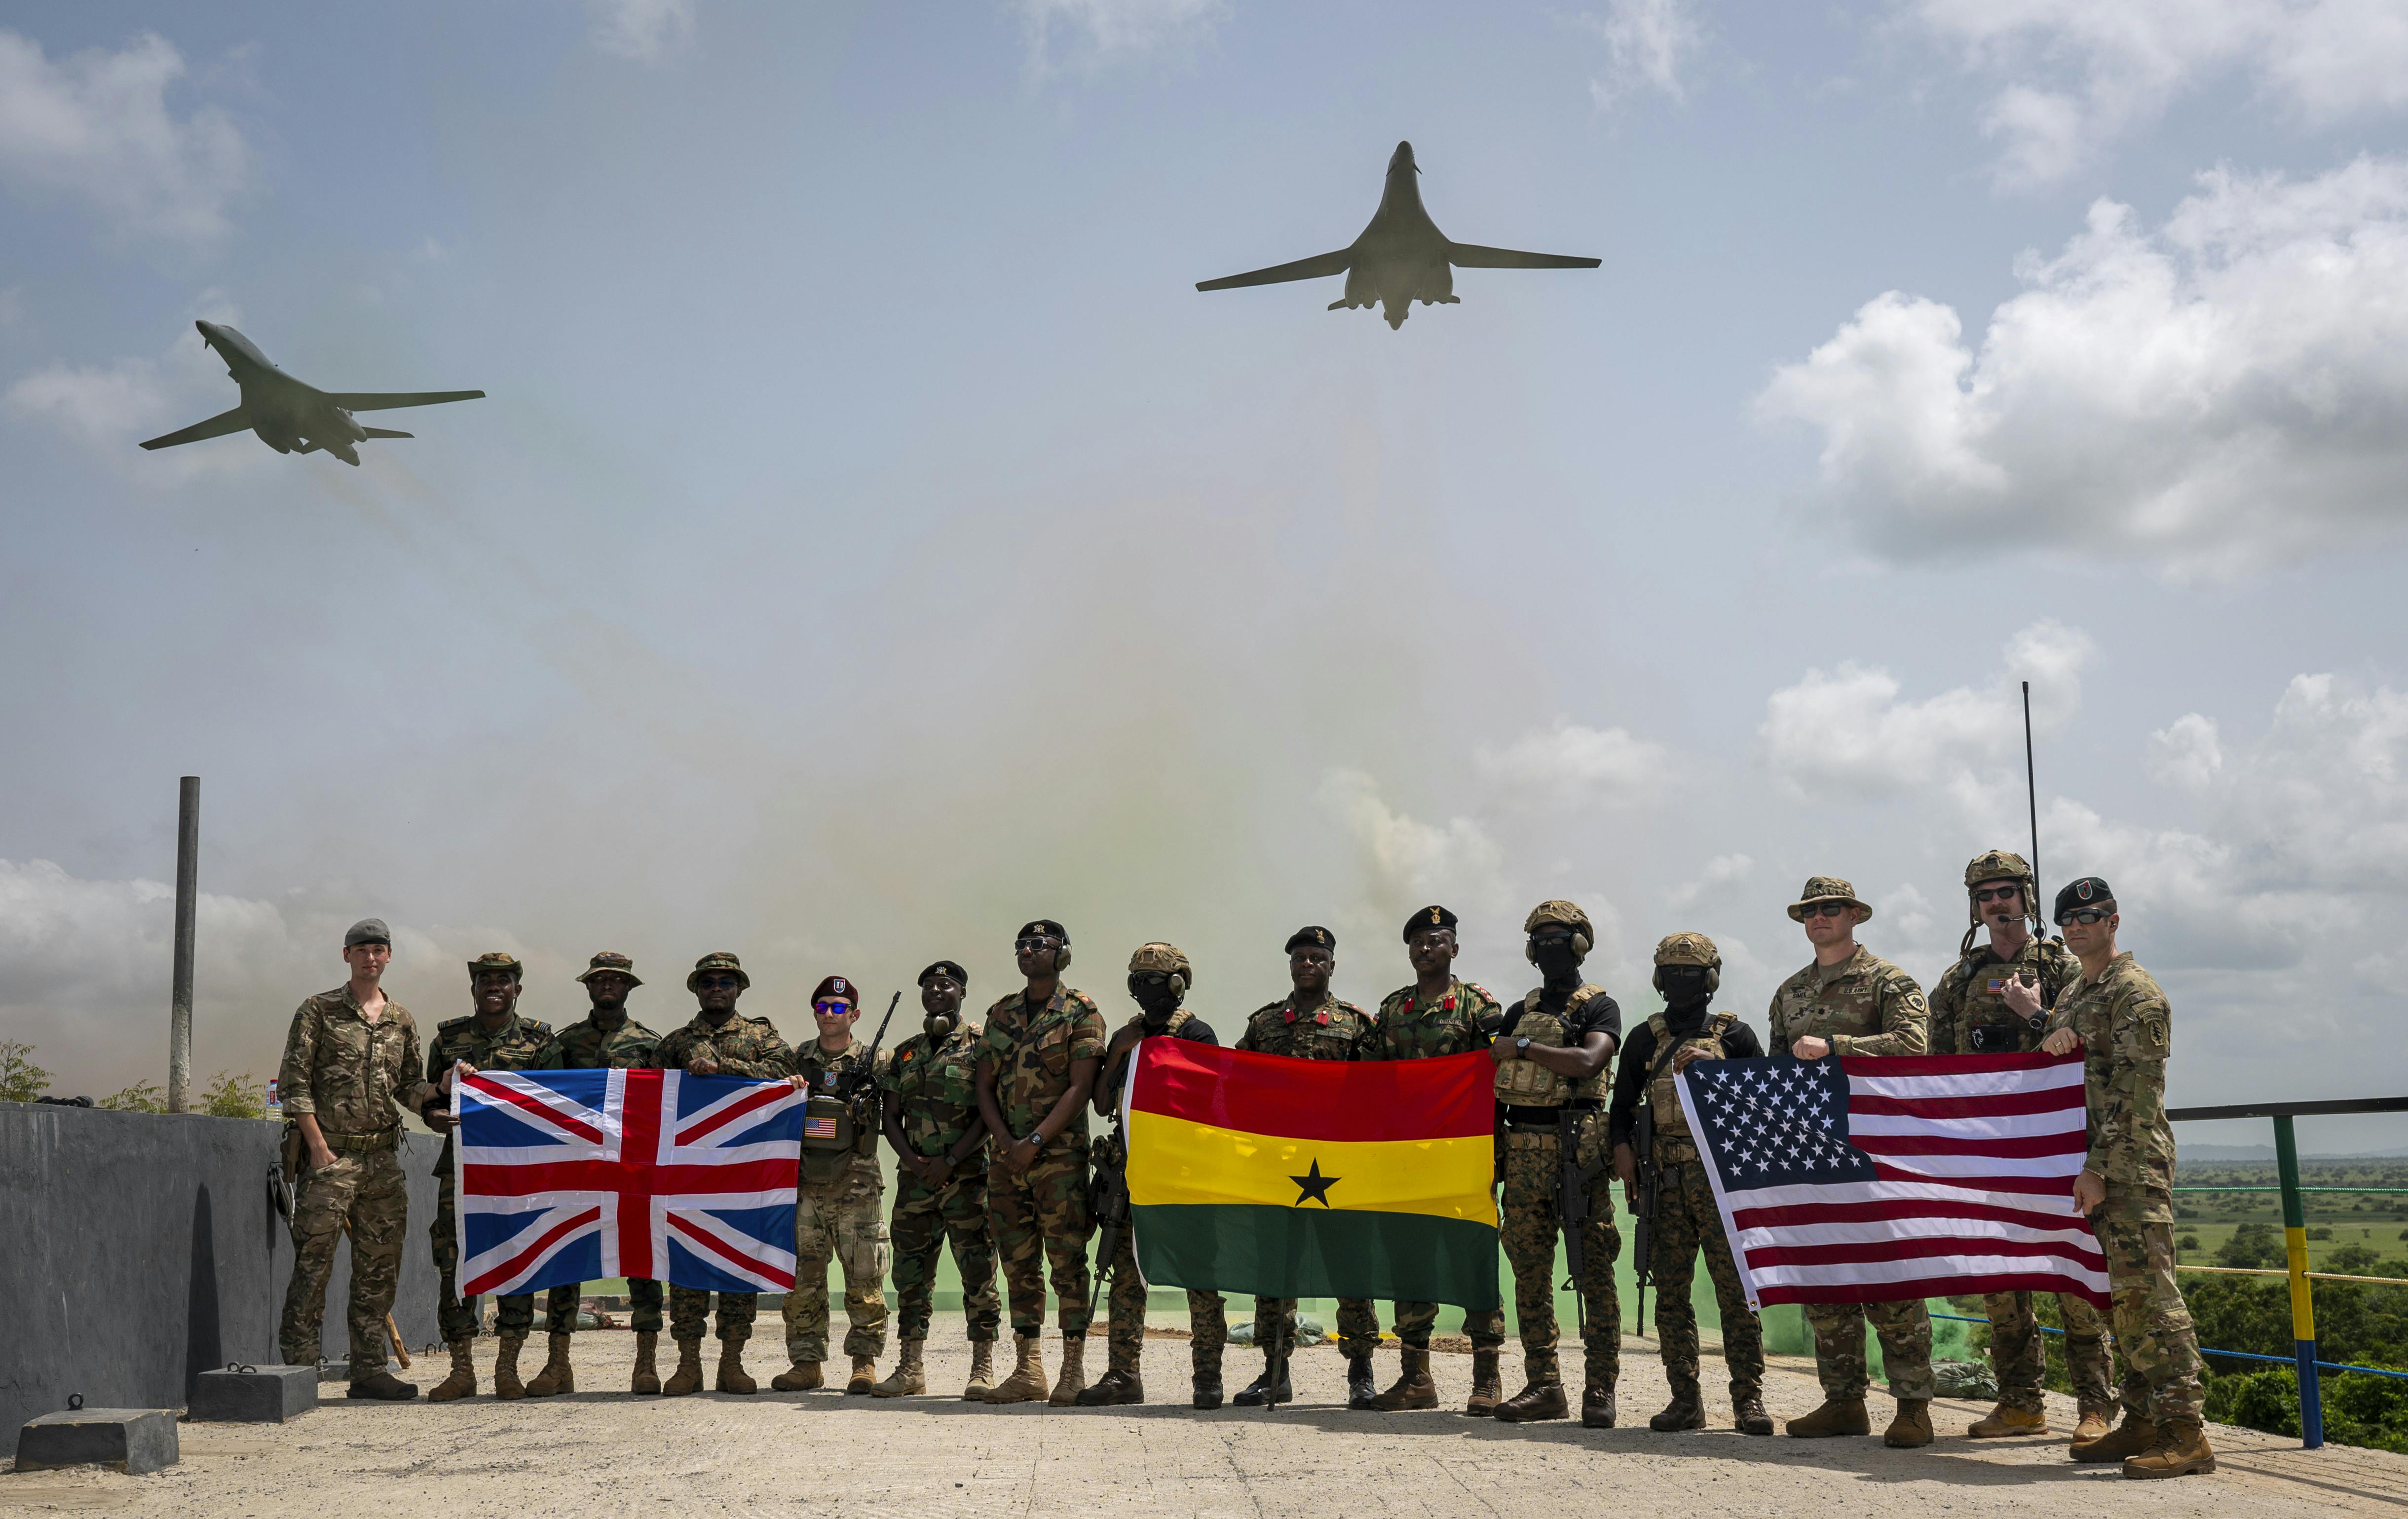 U.S. forces under U.S. Special Operations Command Africa and special operation forces under the U.K.’s 1st Battalion, Ranger Regiment, and members of the Ghana Armed Forces